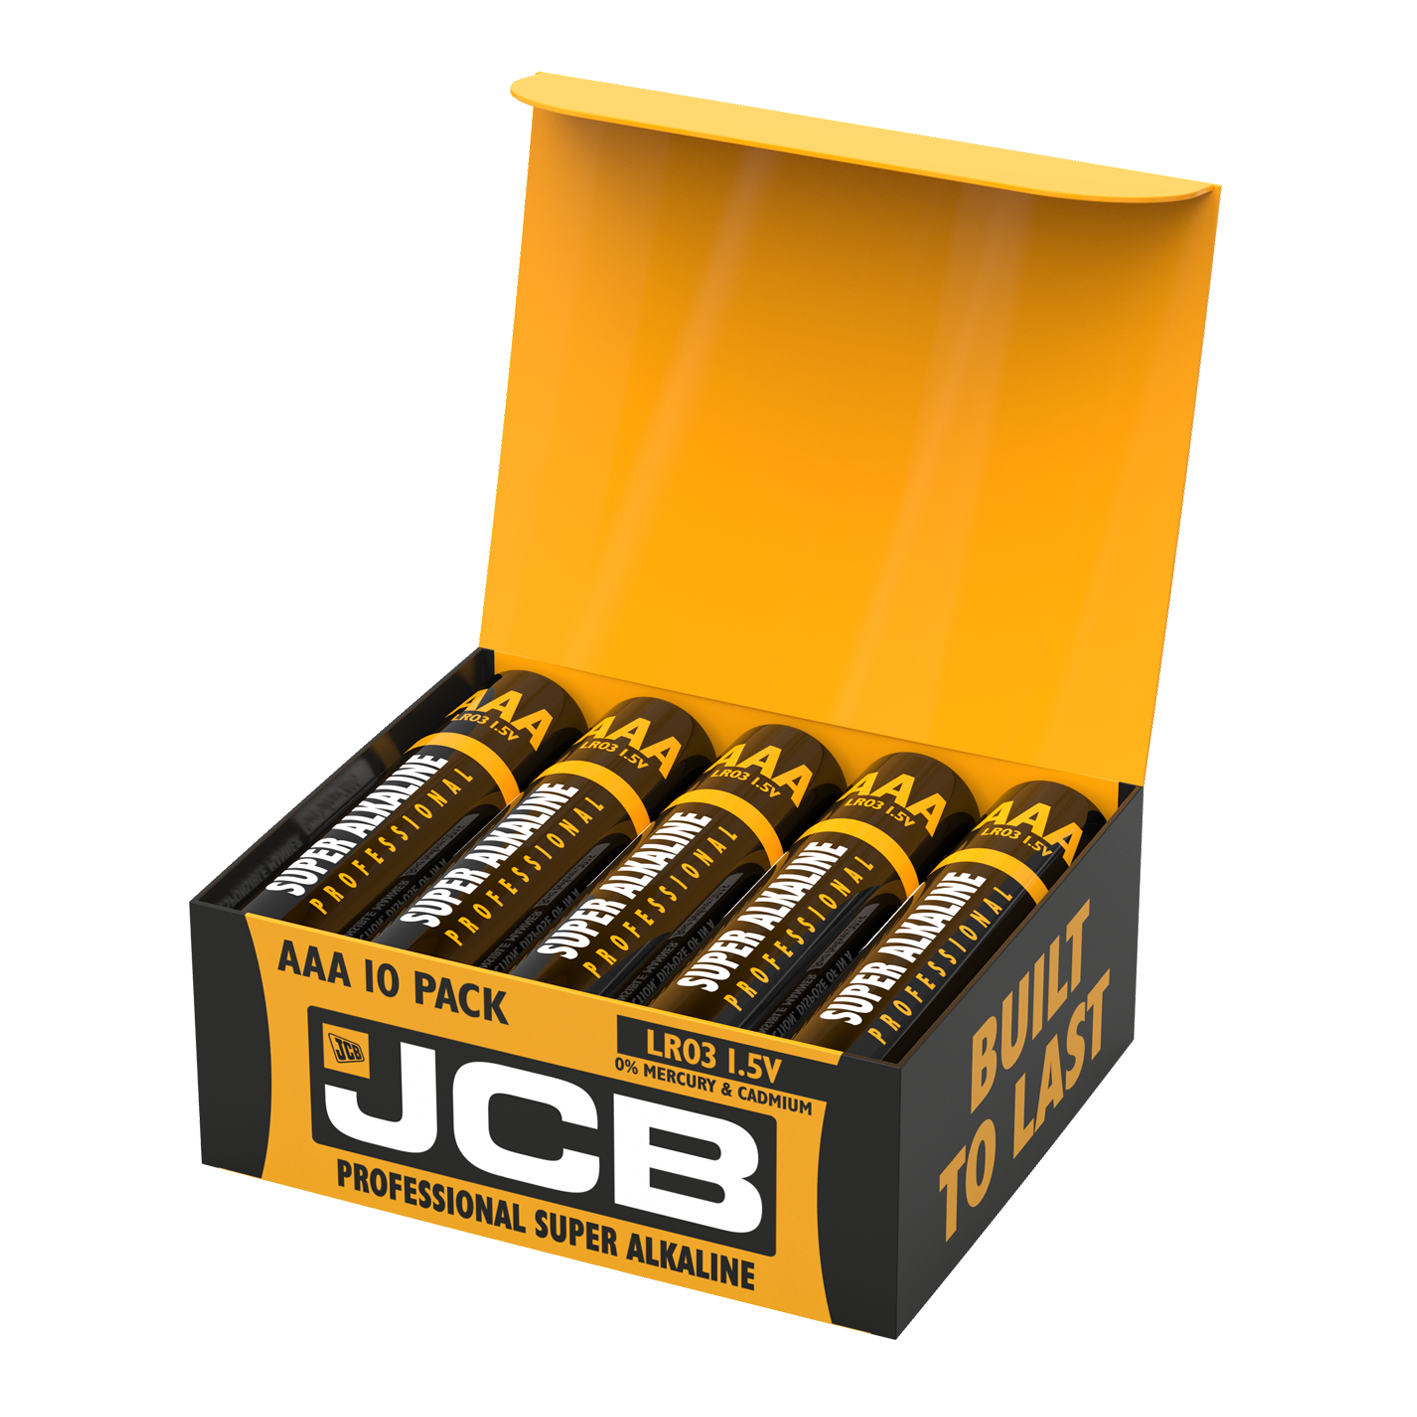 JCB AAA Industrial, Pack of 10 - Priced & Sold Per Cell